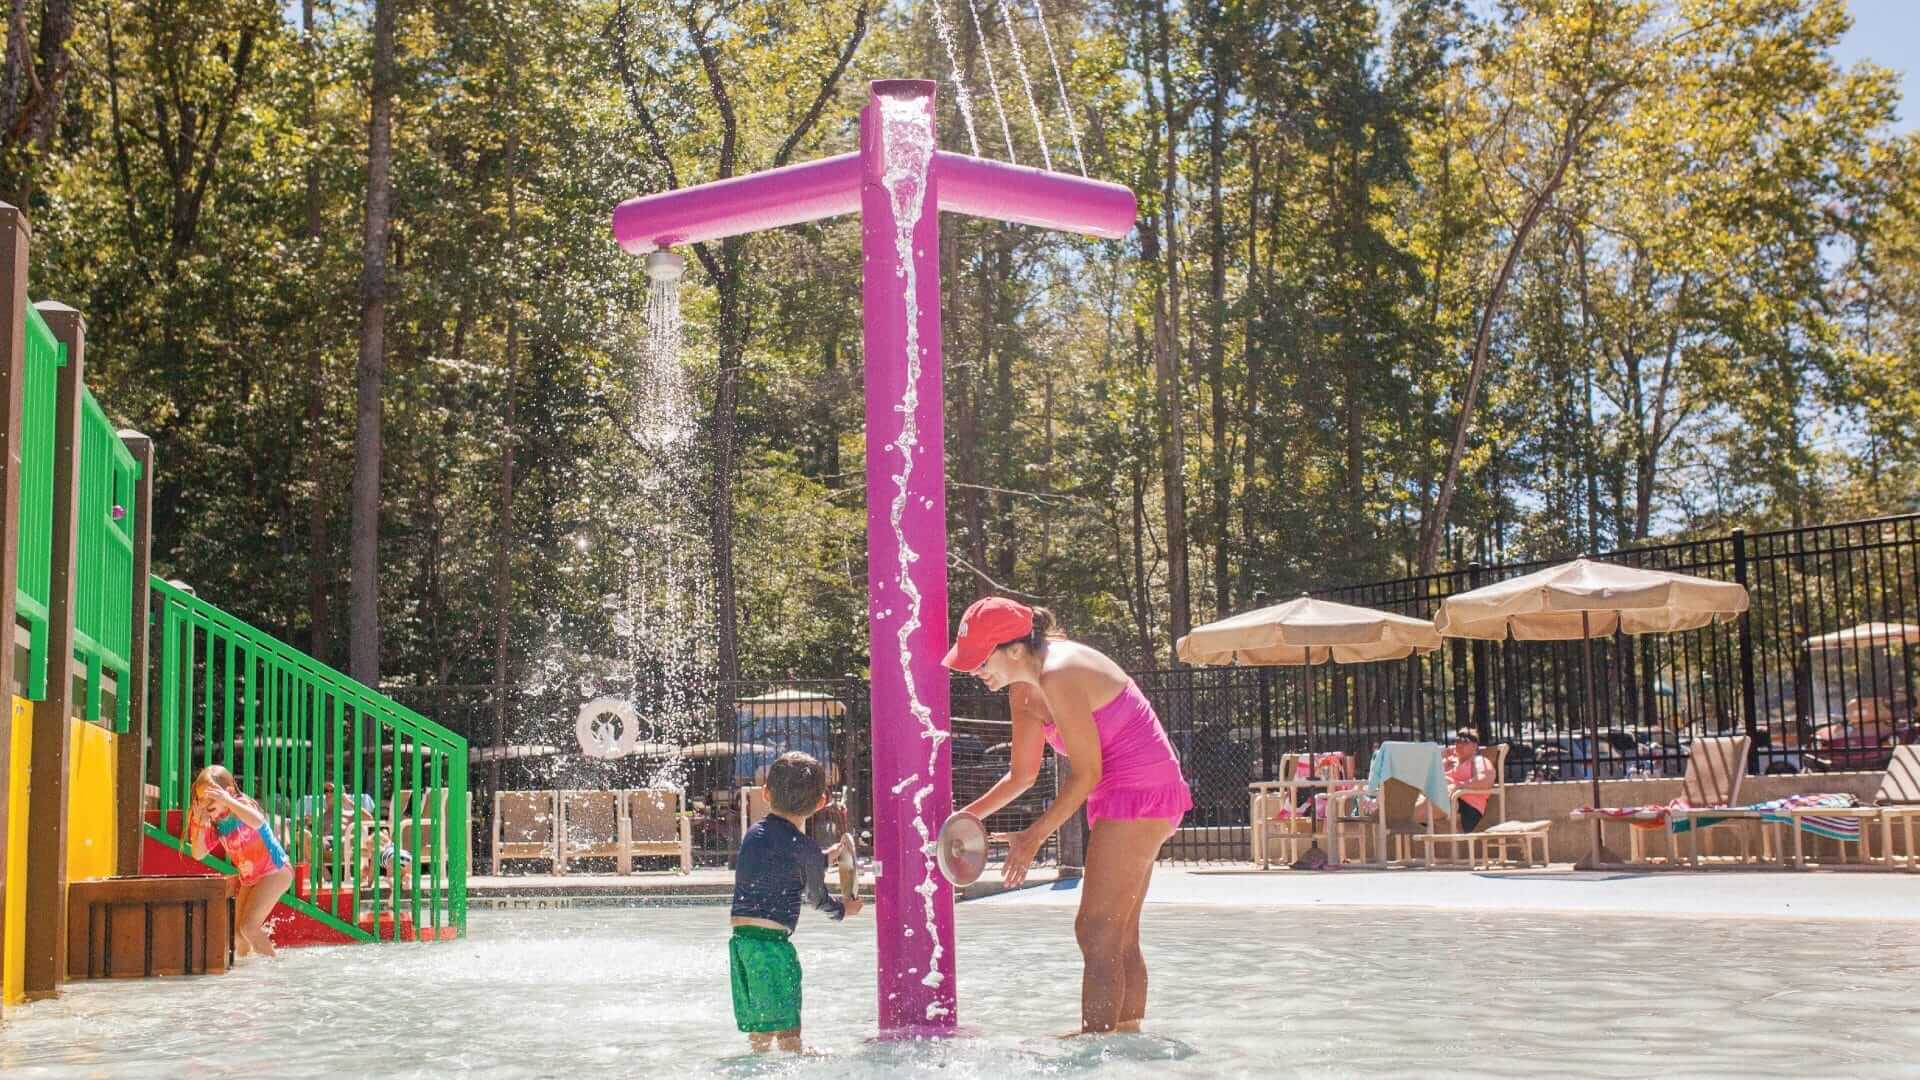 Kid activating the three tree water play feature at a waterpark.